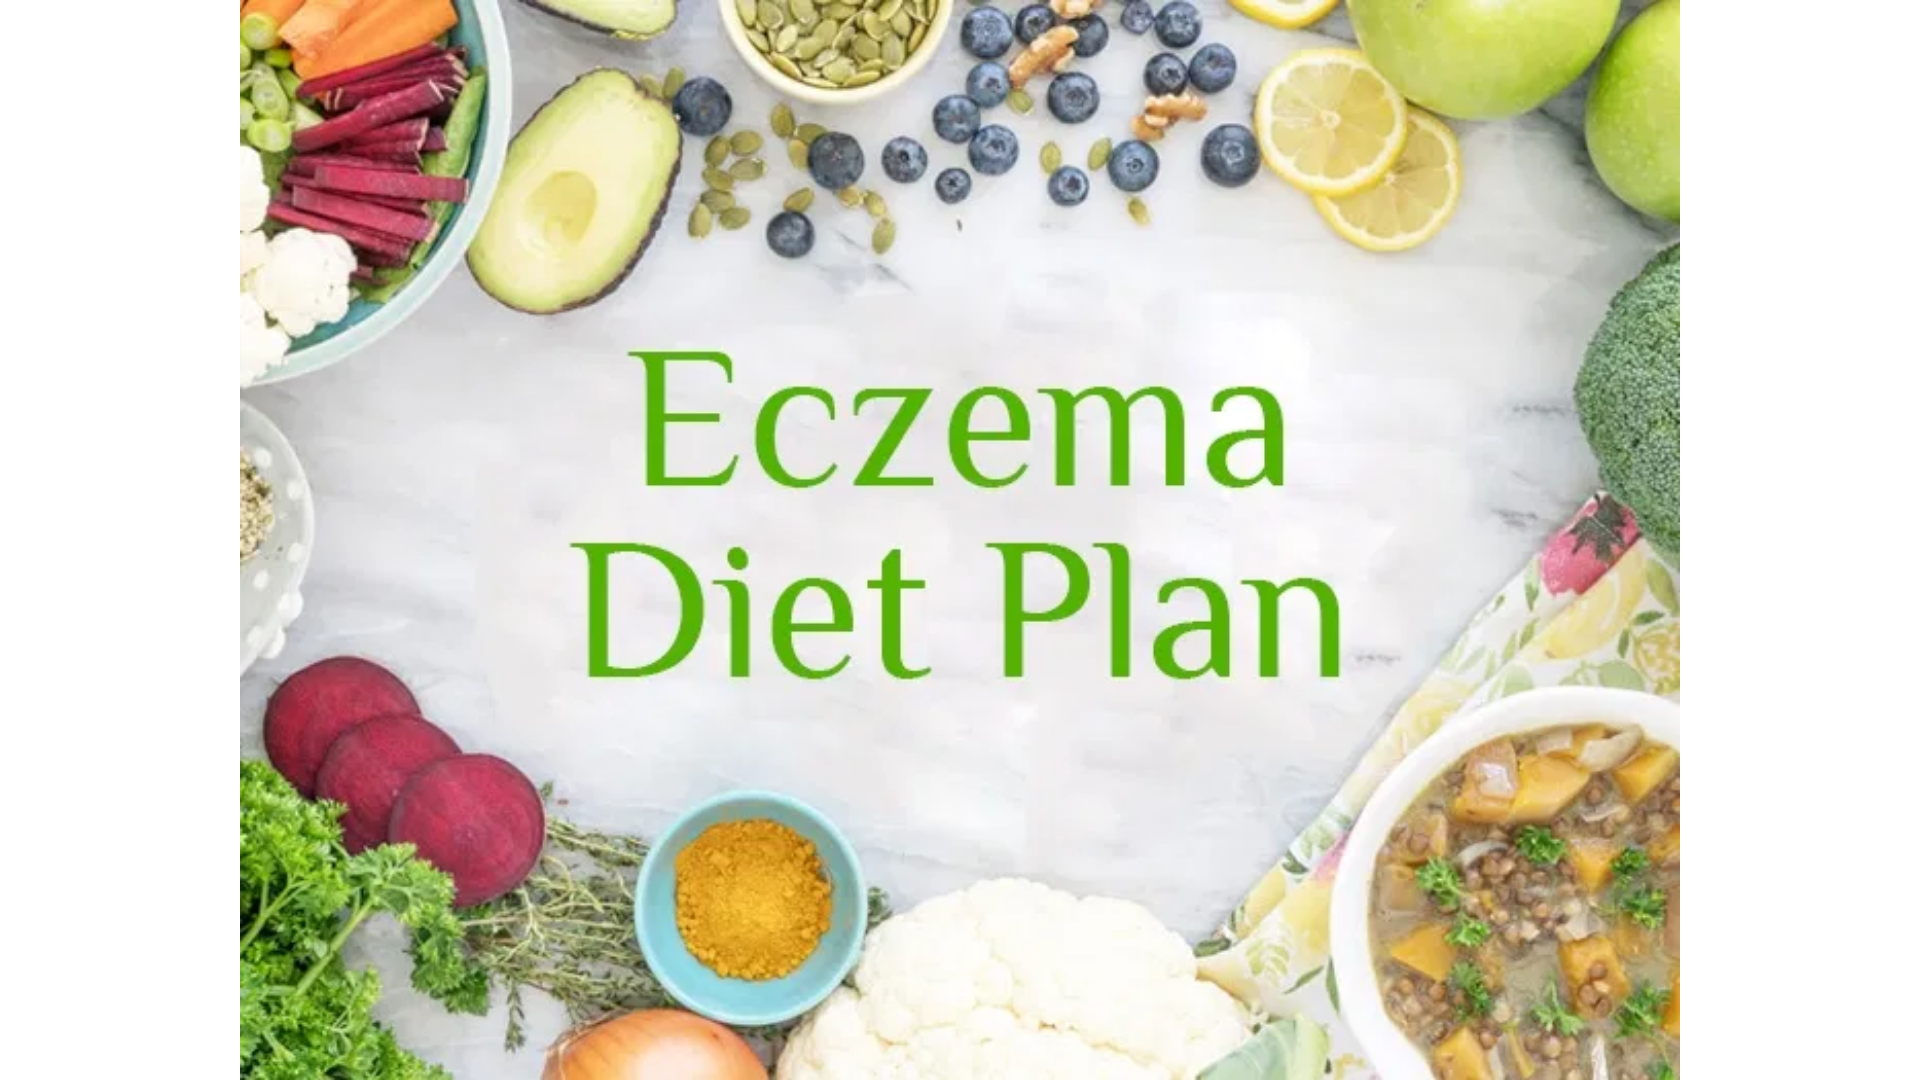 Eczema Diet: What You Should And Shouldnât Eat